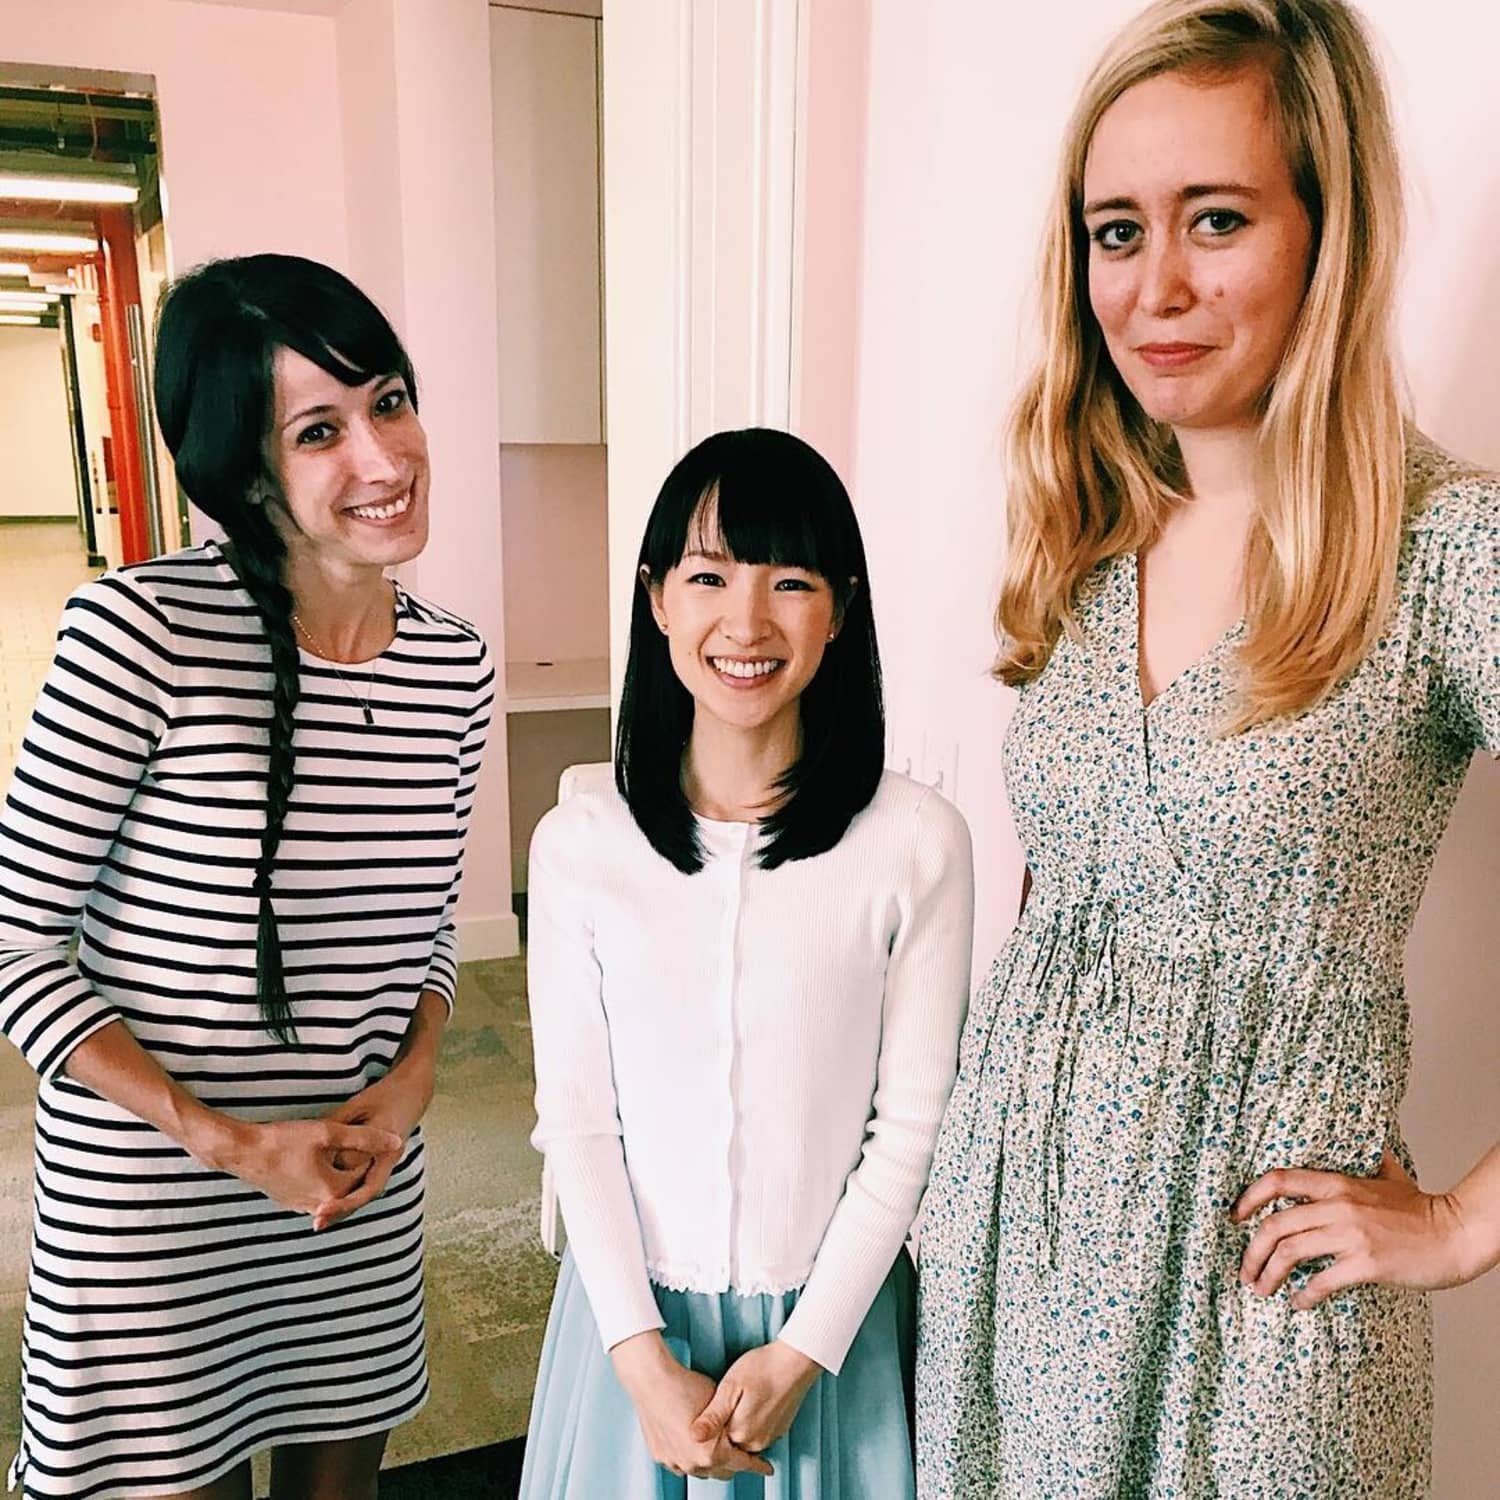 10 Things You Might Not Know About Marie Kondo